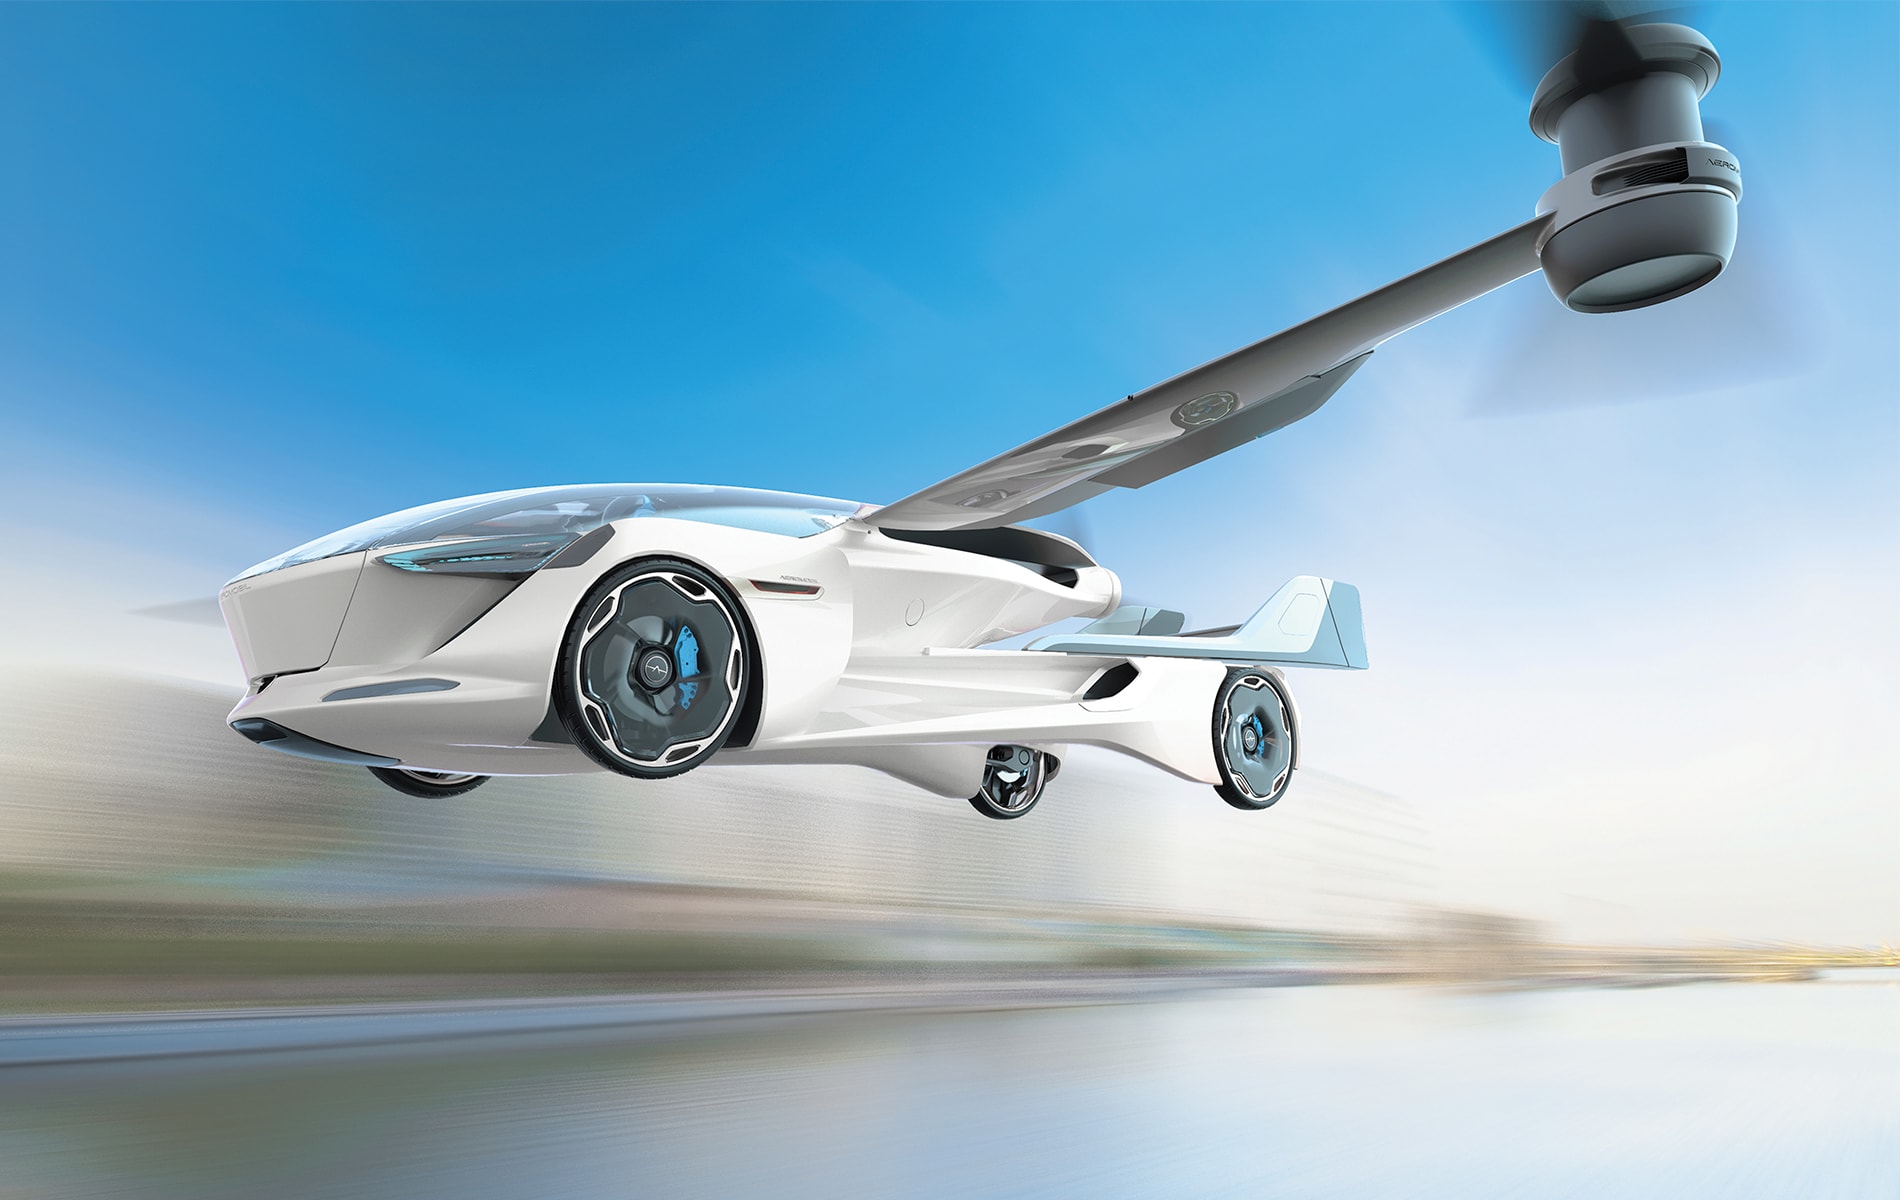 The AeroMobil 5.0 VTOL—This four-seat concept has two electrically driven rotors for vertical takeoff with horizontal thrust from an electric-powered rear-mounted pusher propeller. Each occupant will have a personalized in-flight experience, with flight or drive data, and advanced communications and media to ensure occupants stay connected while in the air or on the road. The company expects the AeroMobil 5.0 to be available within seven to ten years, in line with the reality of building and scaling the infrastructure and regulation for such innovative personal transportation. Artist rendering courtesy of AeroMobil.